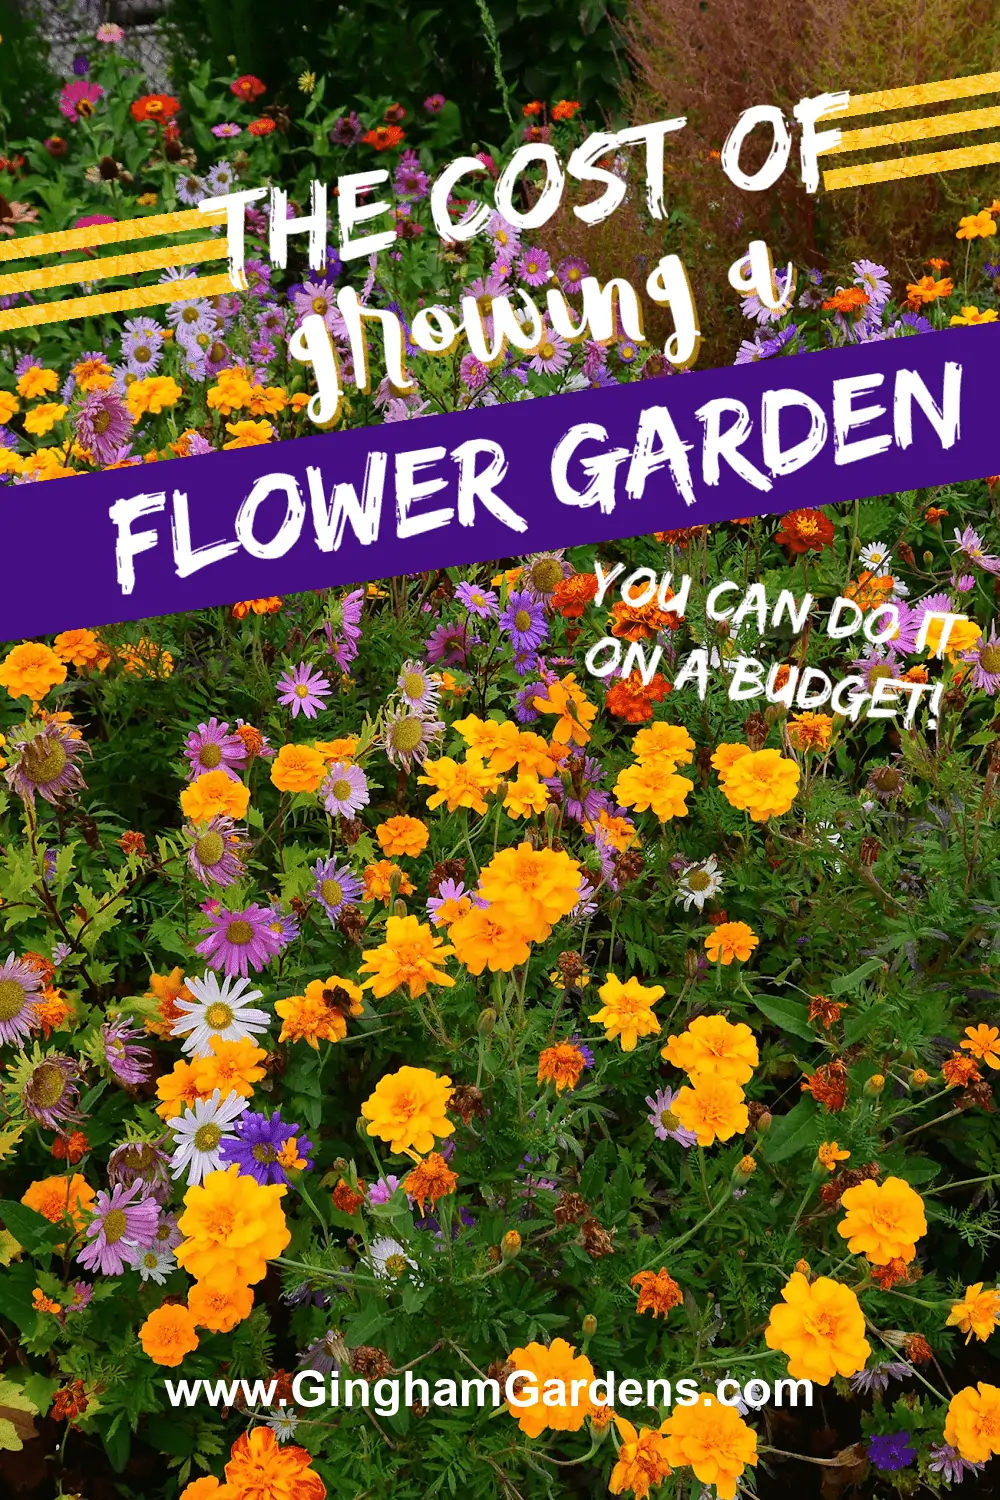 Image of a flower garden with text overlay - The cost of growing a flower garden